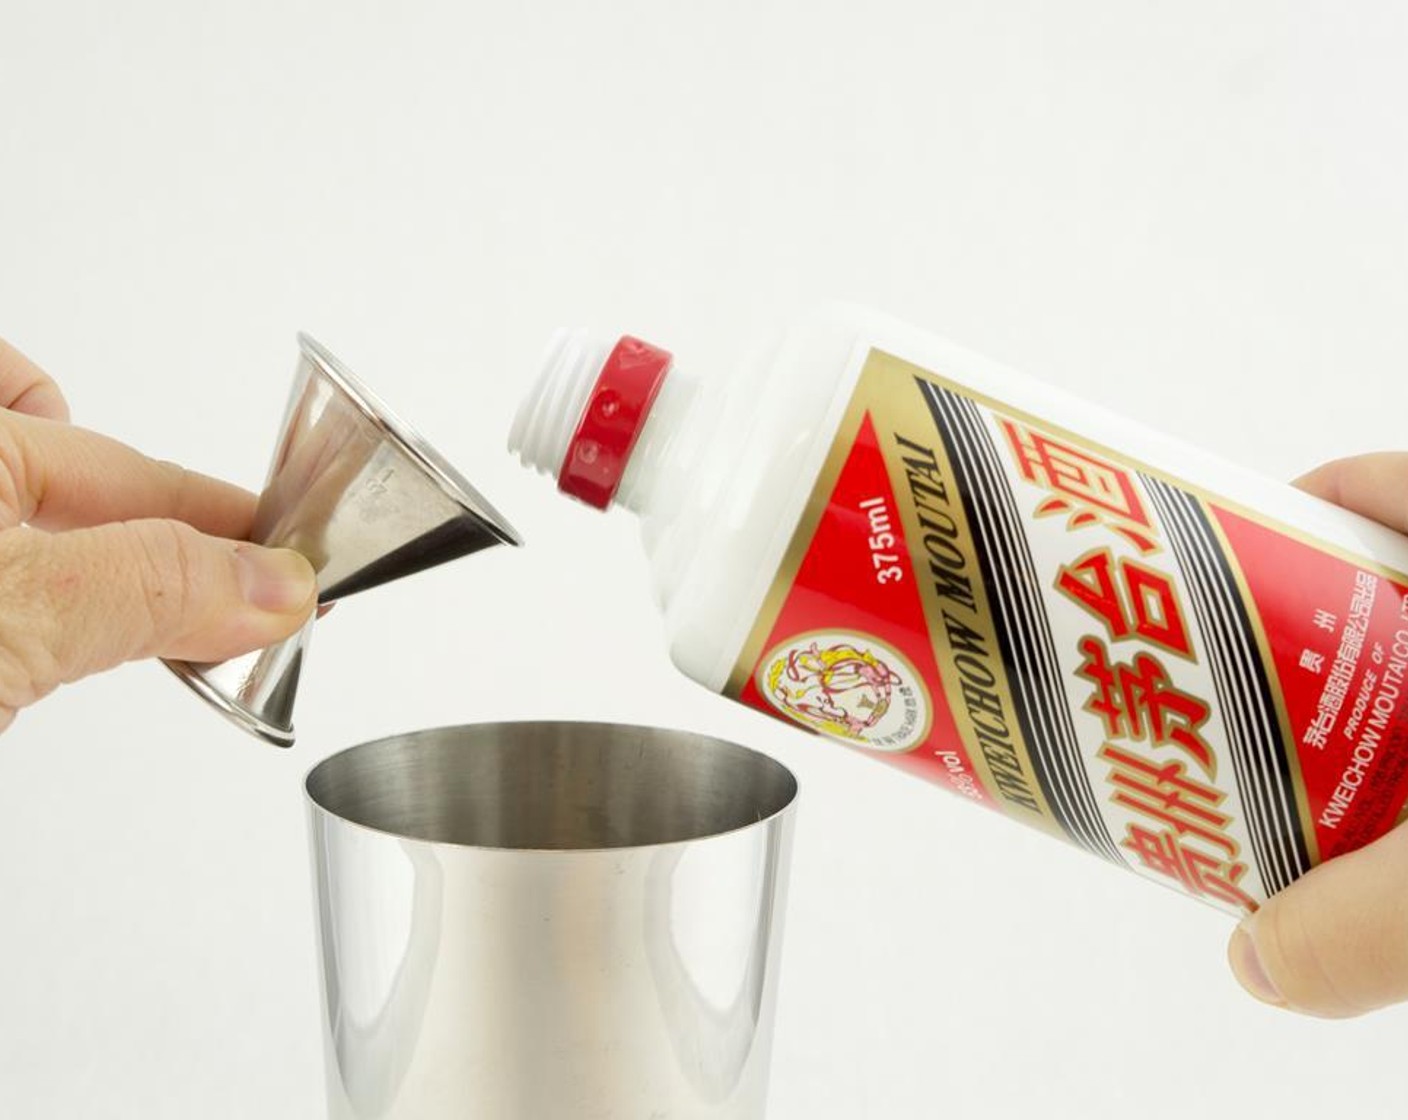 step 1 Pour Kweichow Moutai Baijiu (1.3 fl oz) into a cocktail shaker filled with ice cubes.